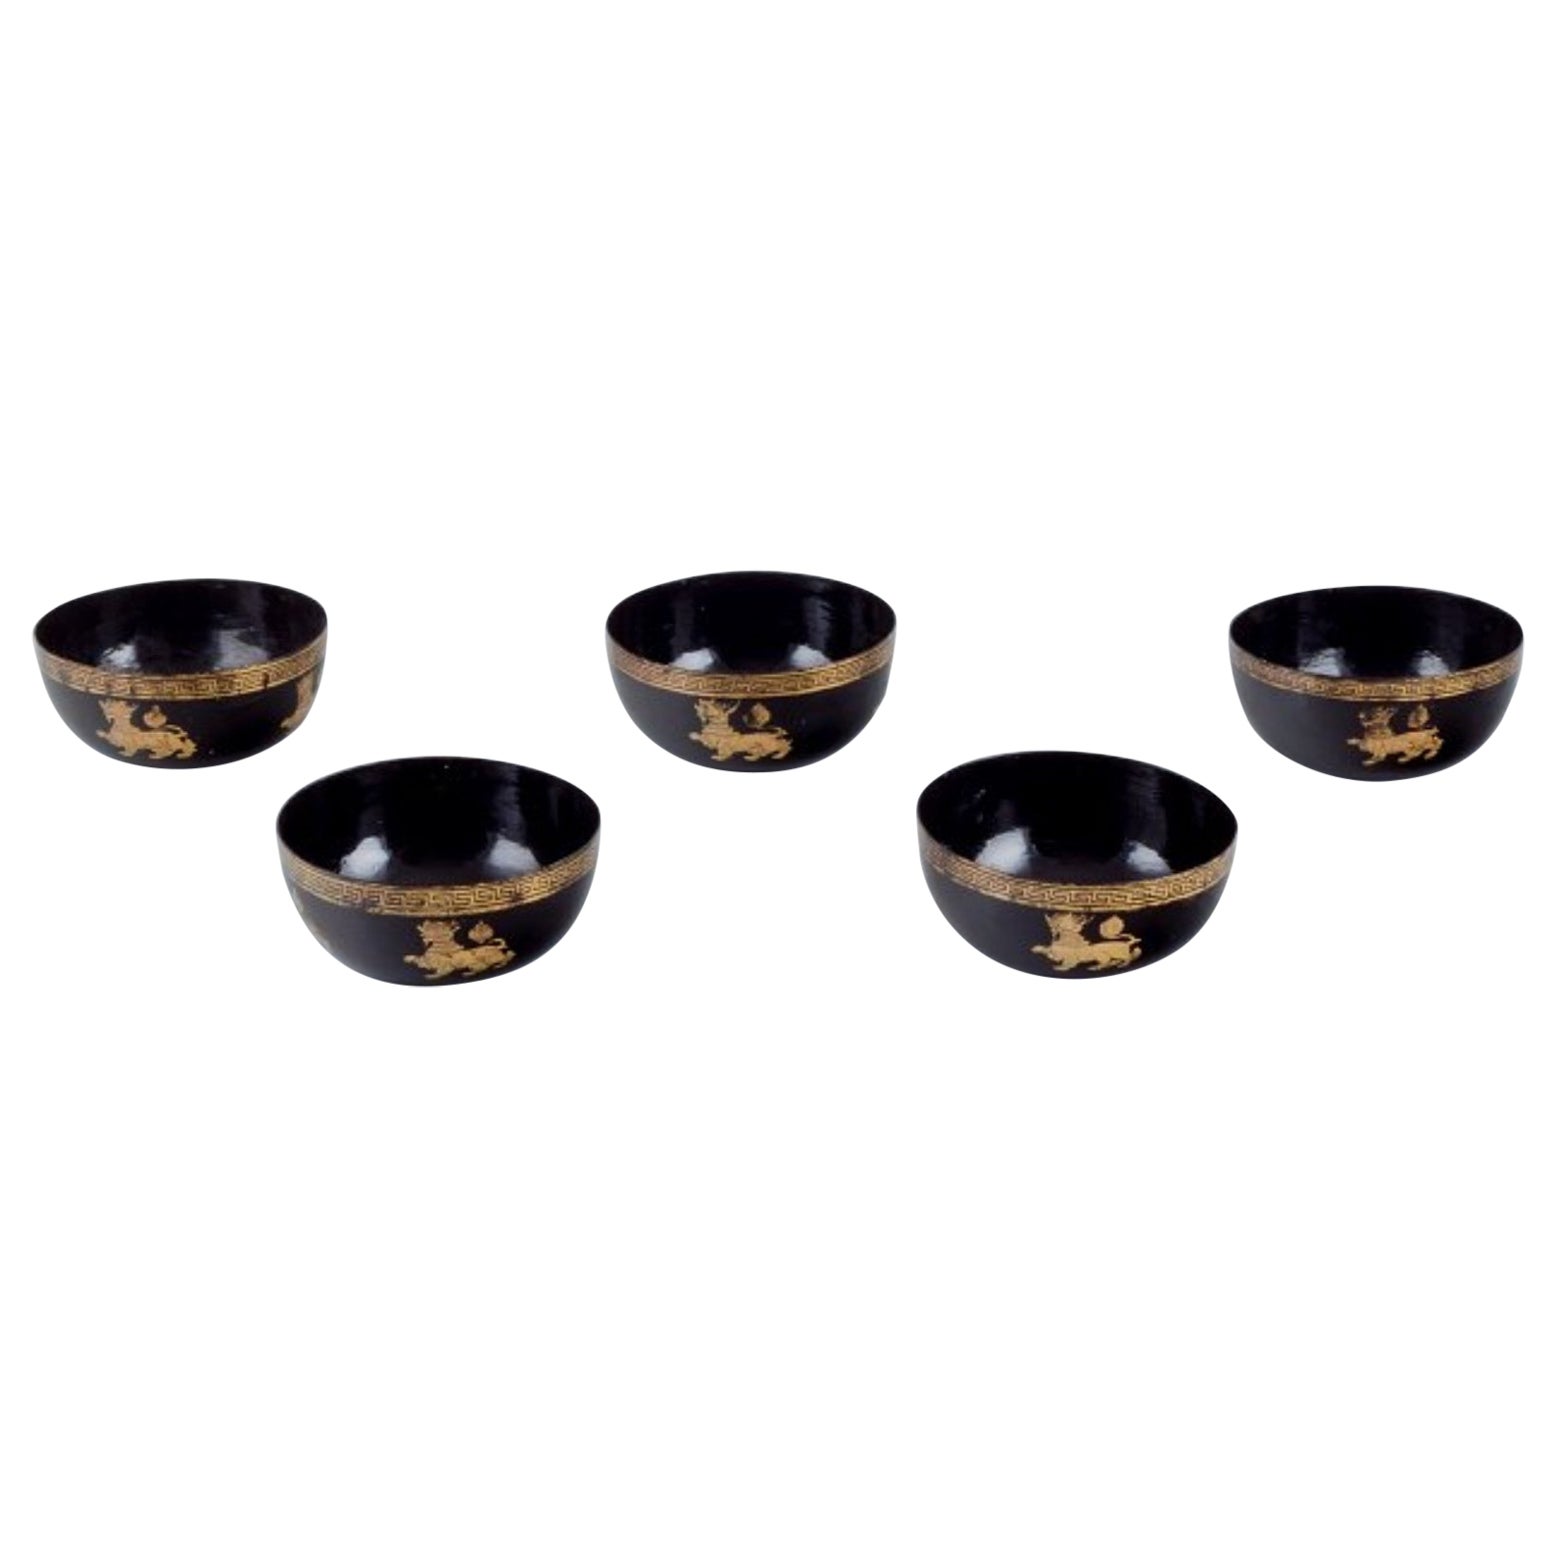 Five Asian bowls made of papier-mâché. Decorated in gold and black.